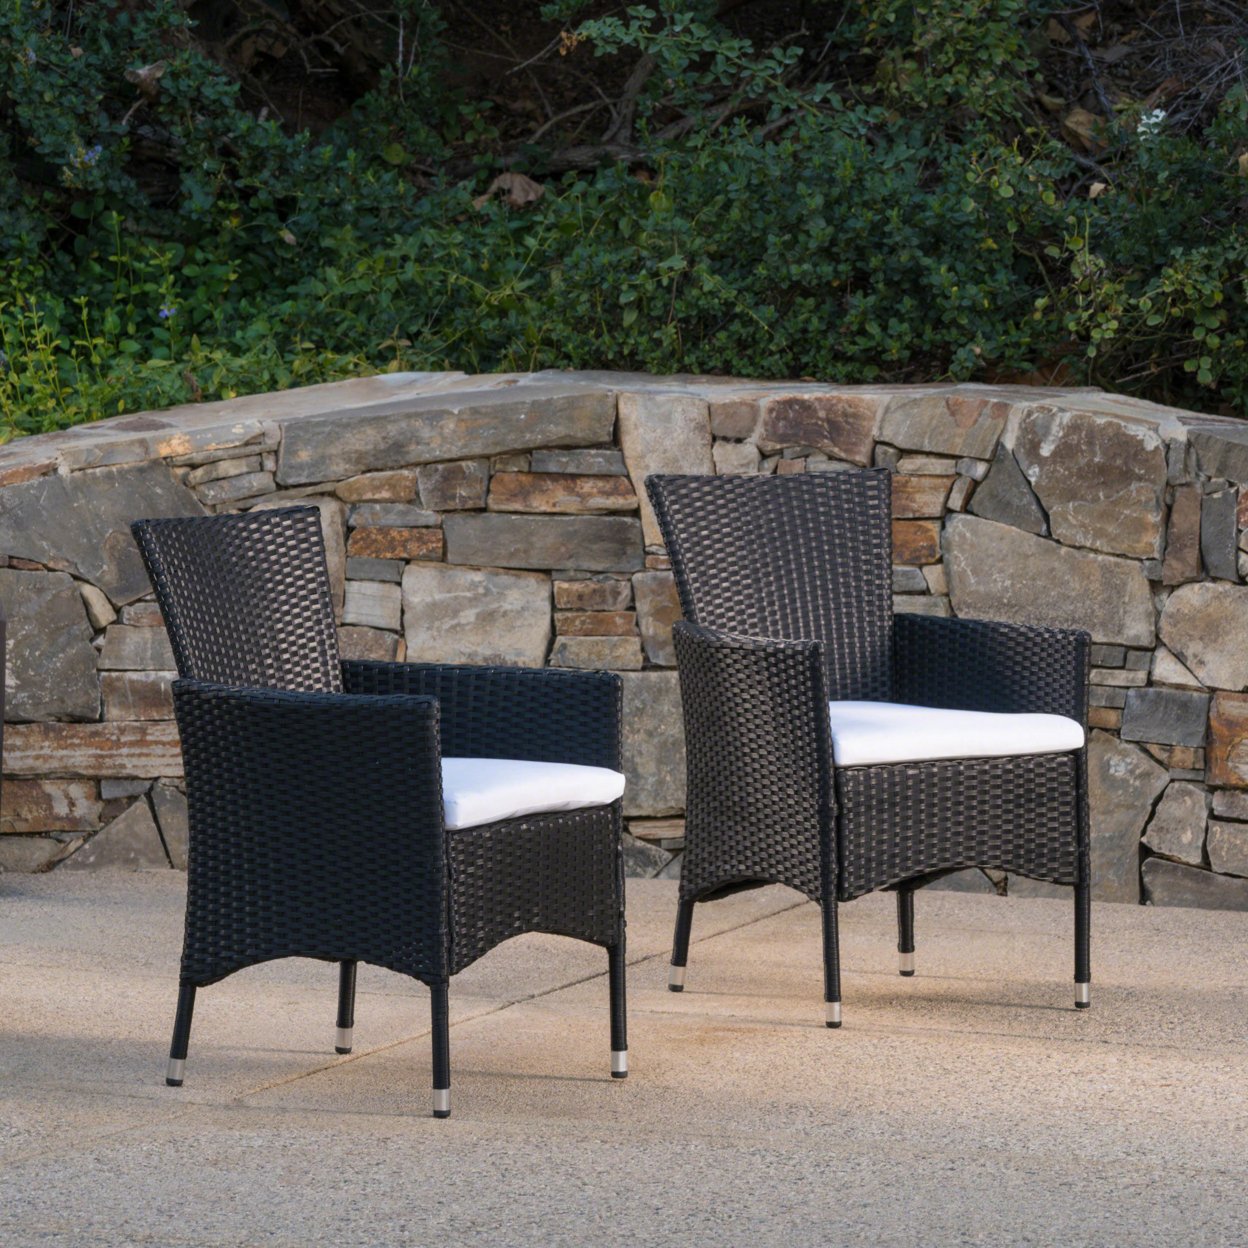 Curtis Outdoor Wicker Dining Chairs with Water Resistant Cushions - Set of 2 - image 1 of 11